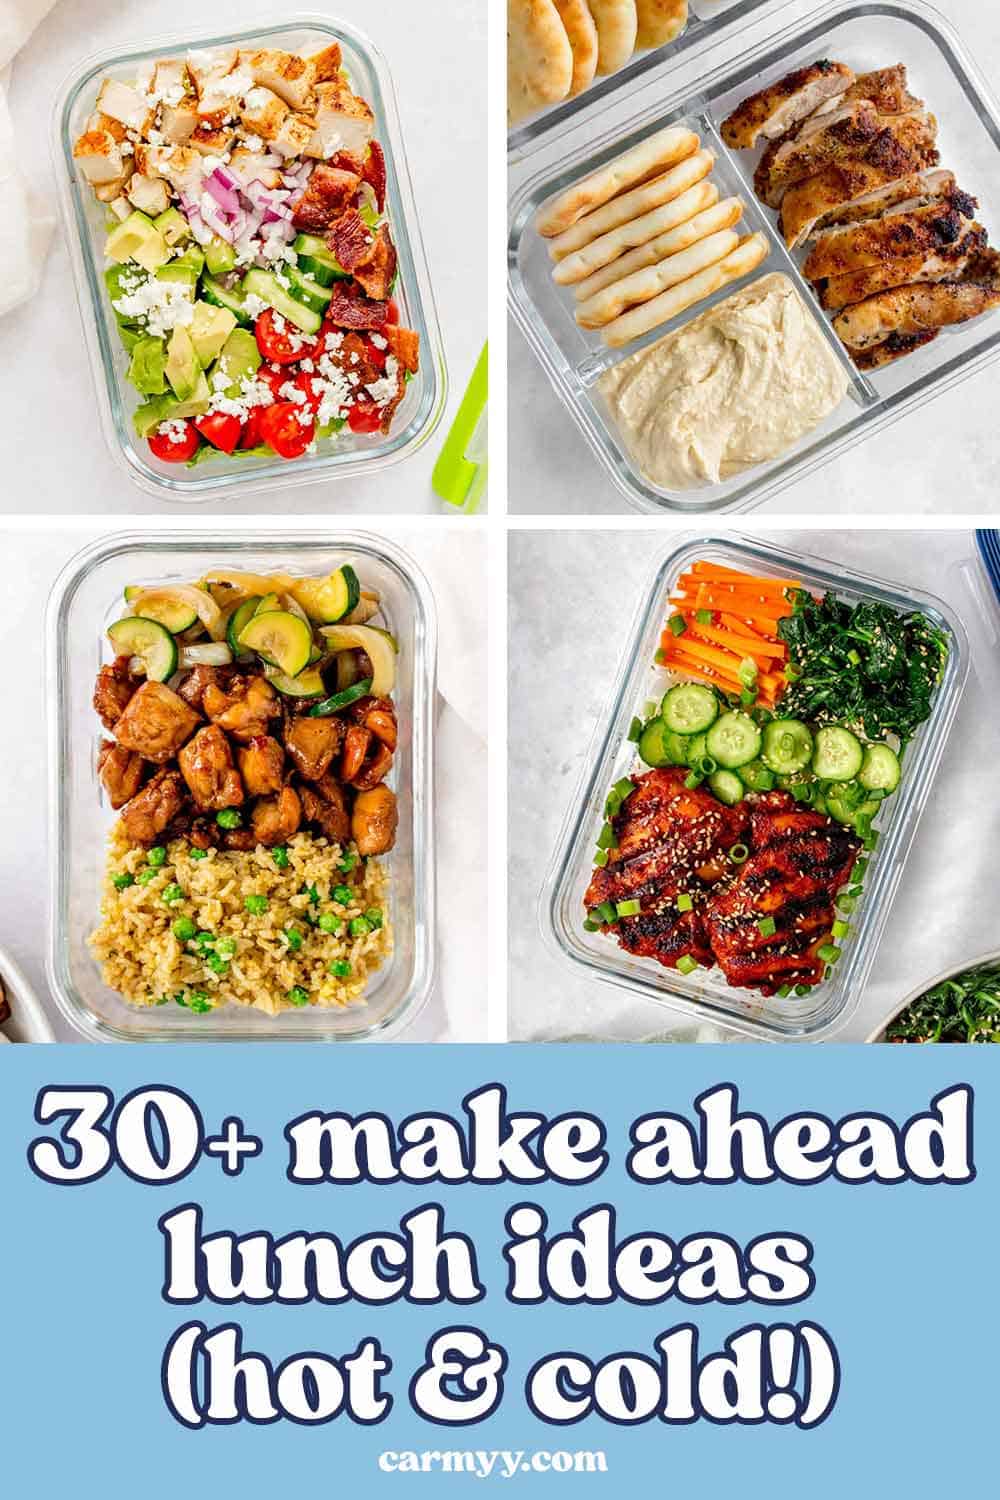 Round up image with four meal preps.